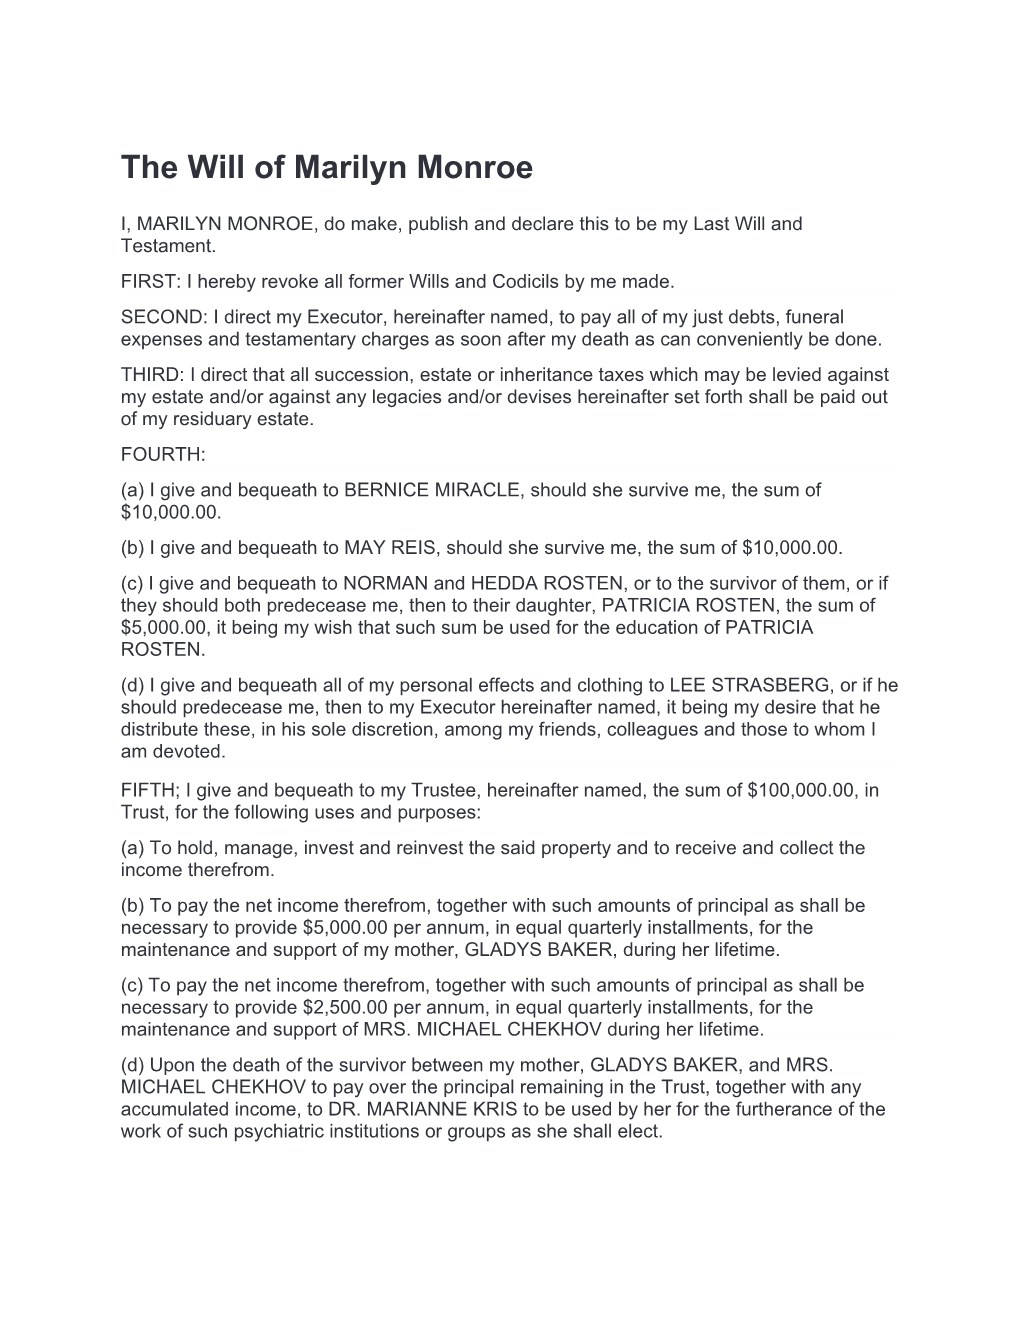 The Will of Marilyn Monroe